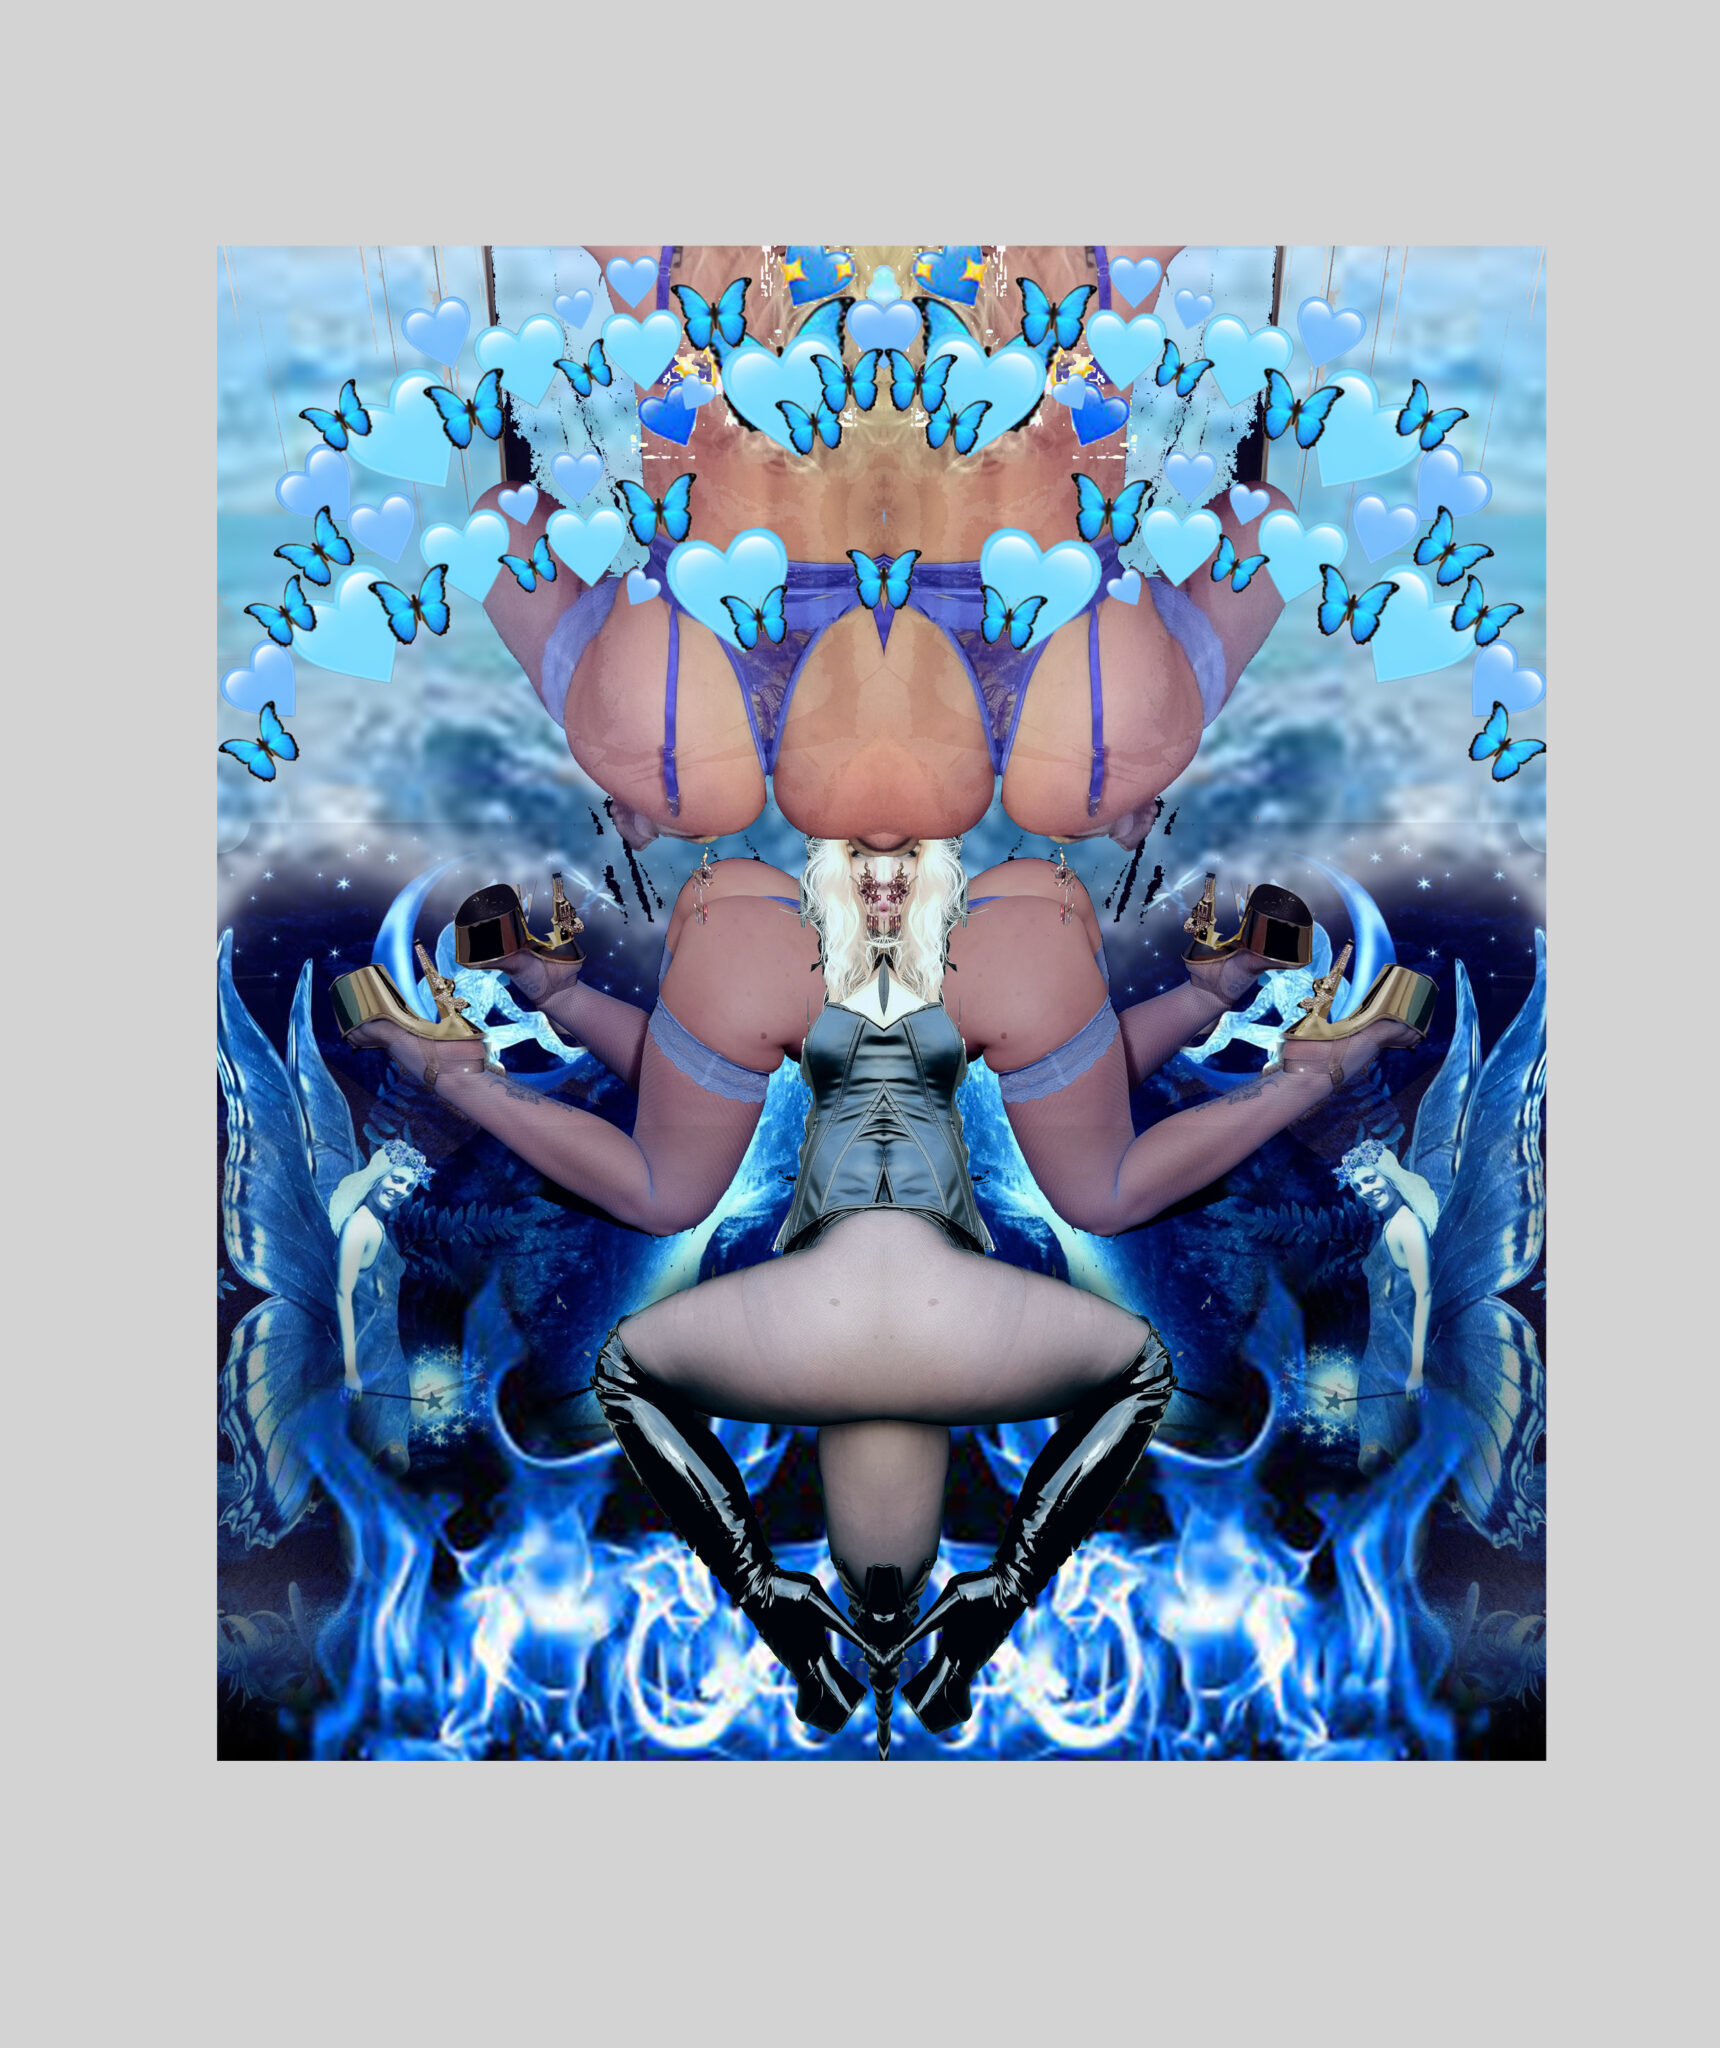 Abstract mirror image of legs. Various blue hues and a cyborg feel.